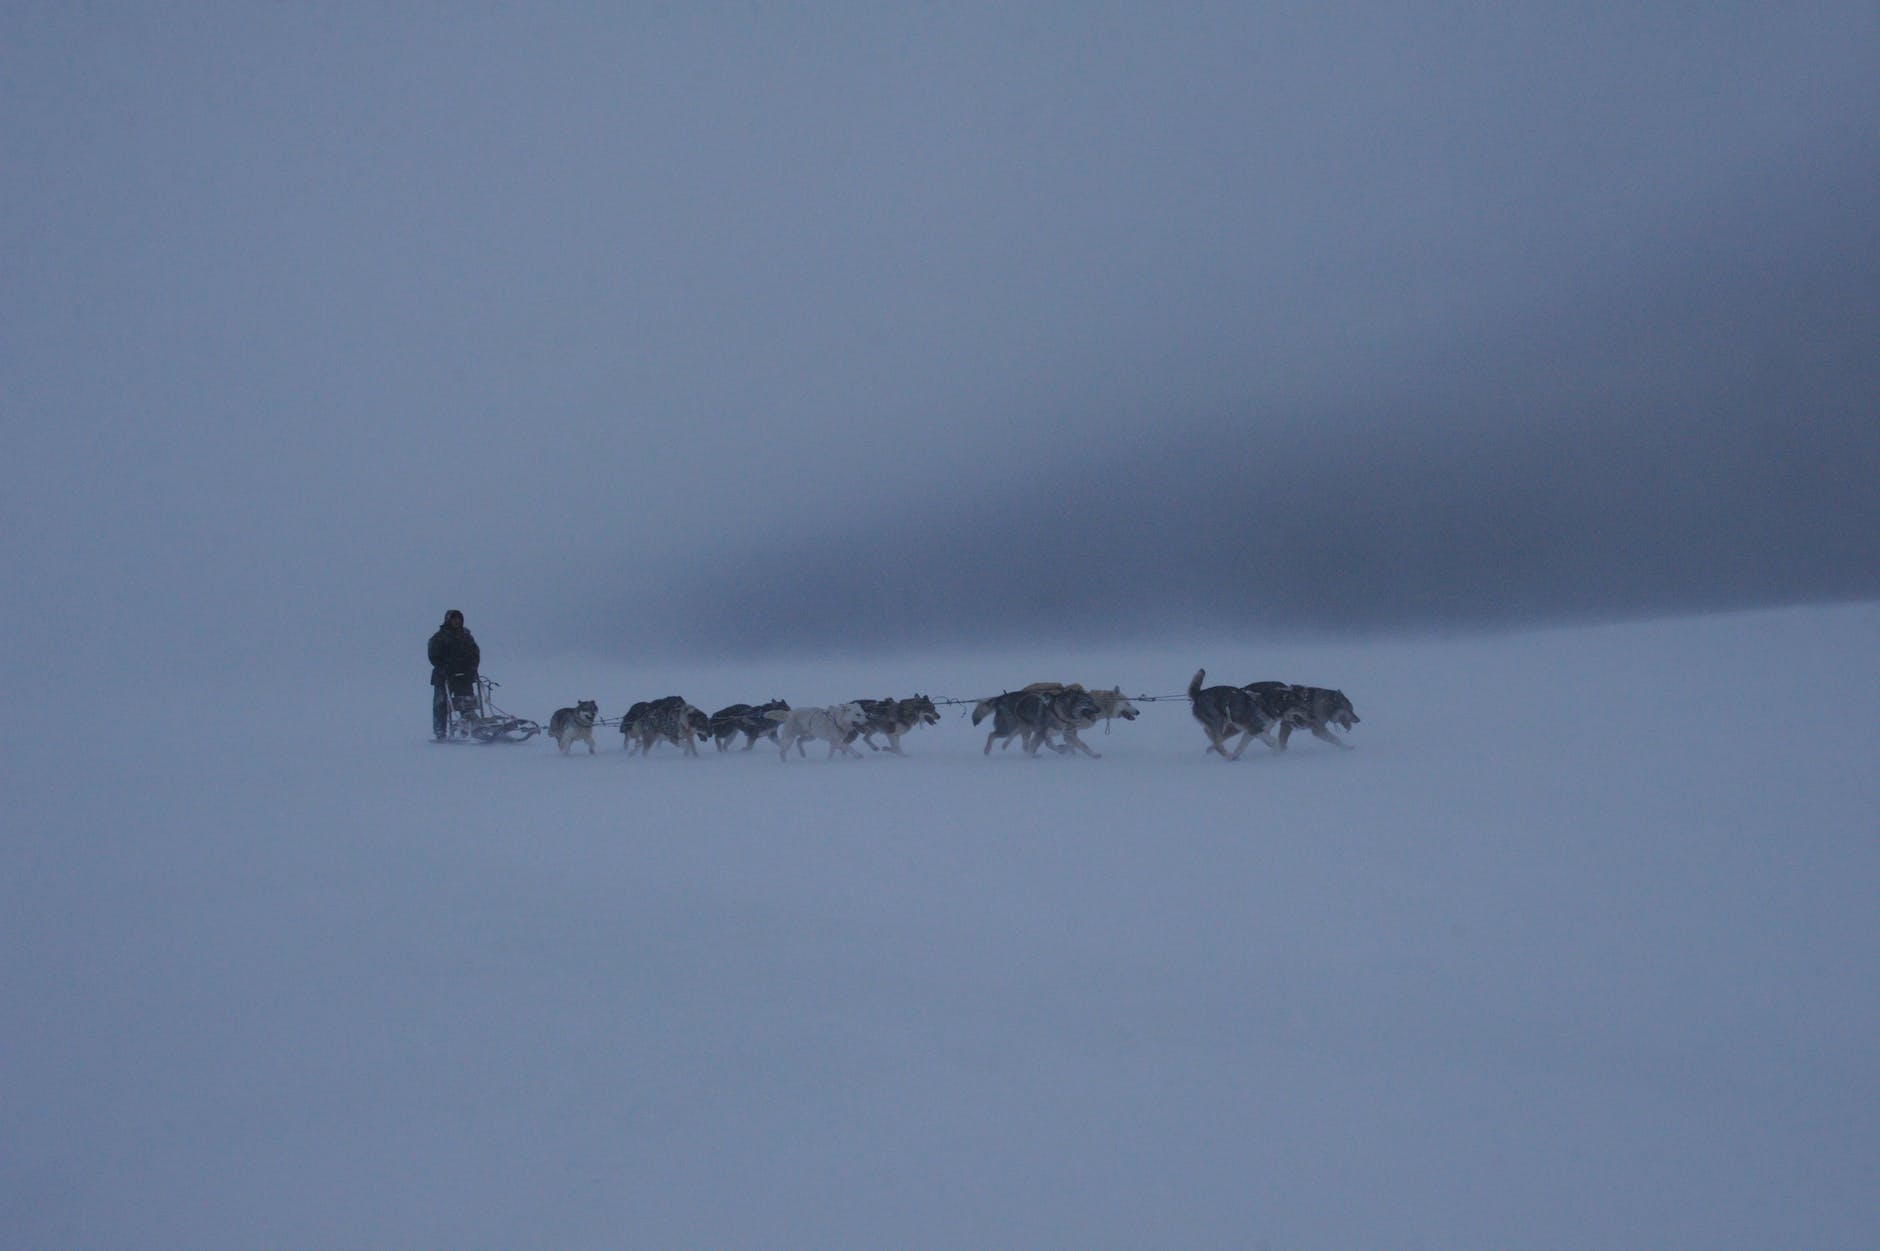 a person riding a sled pulled by sled dogs on snow covered ground